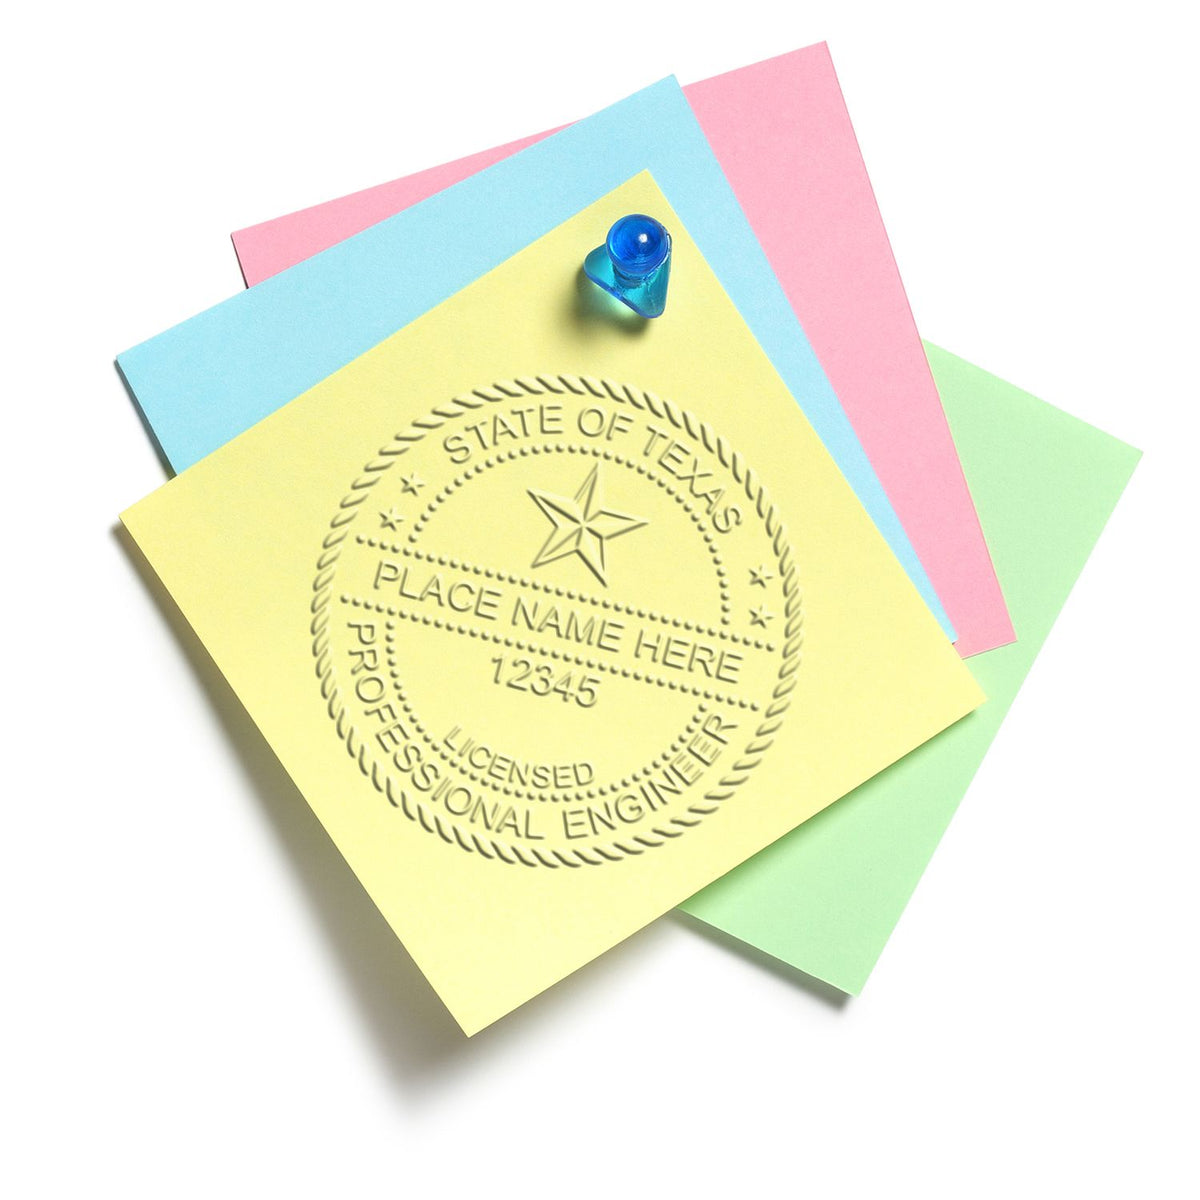 An alternative view of the Hybrid Texas Engineer Seal stamped on a sheet of paper showing the image in use